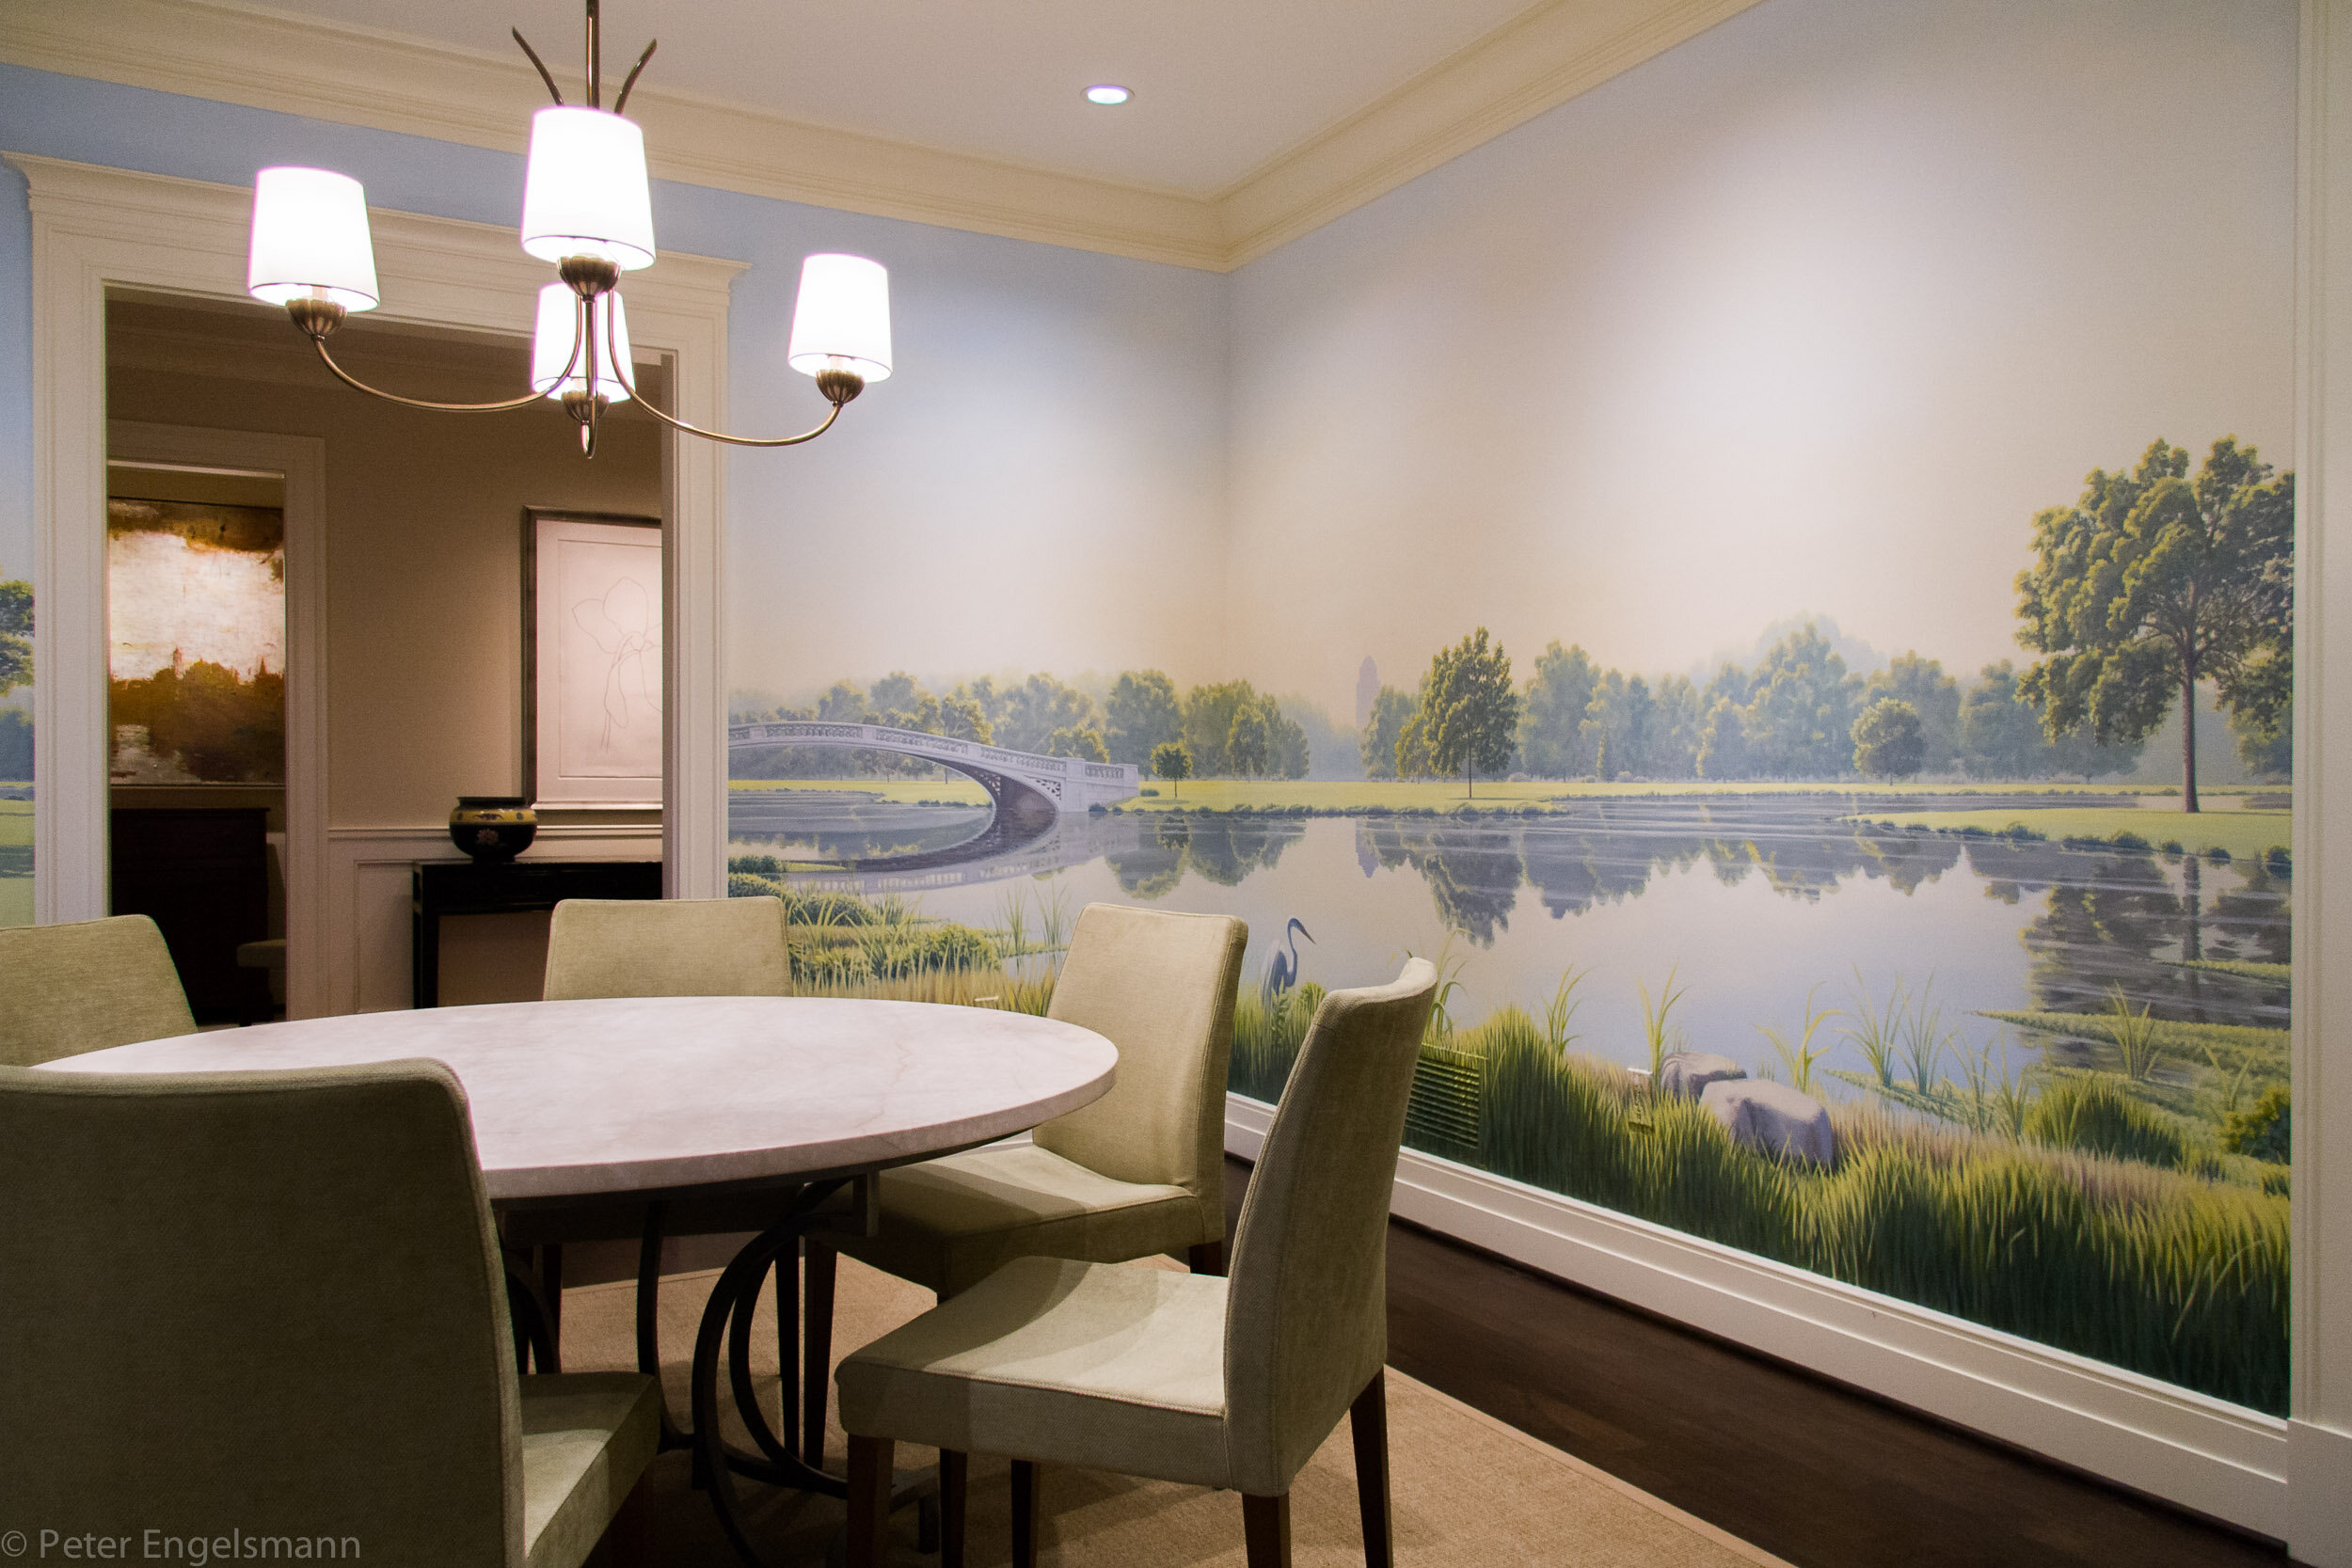  Forest Park Dining Room Mural, acrylic on wallboard, private residence. © Peter K. Engelsmann 